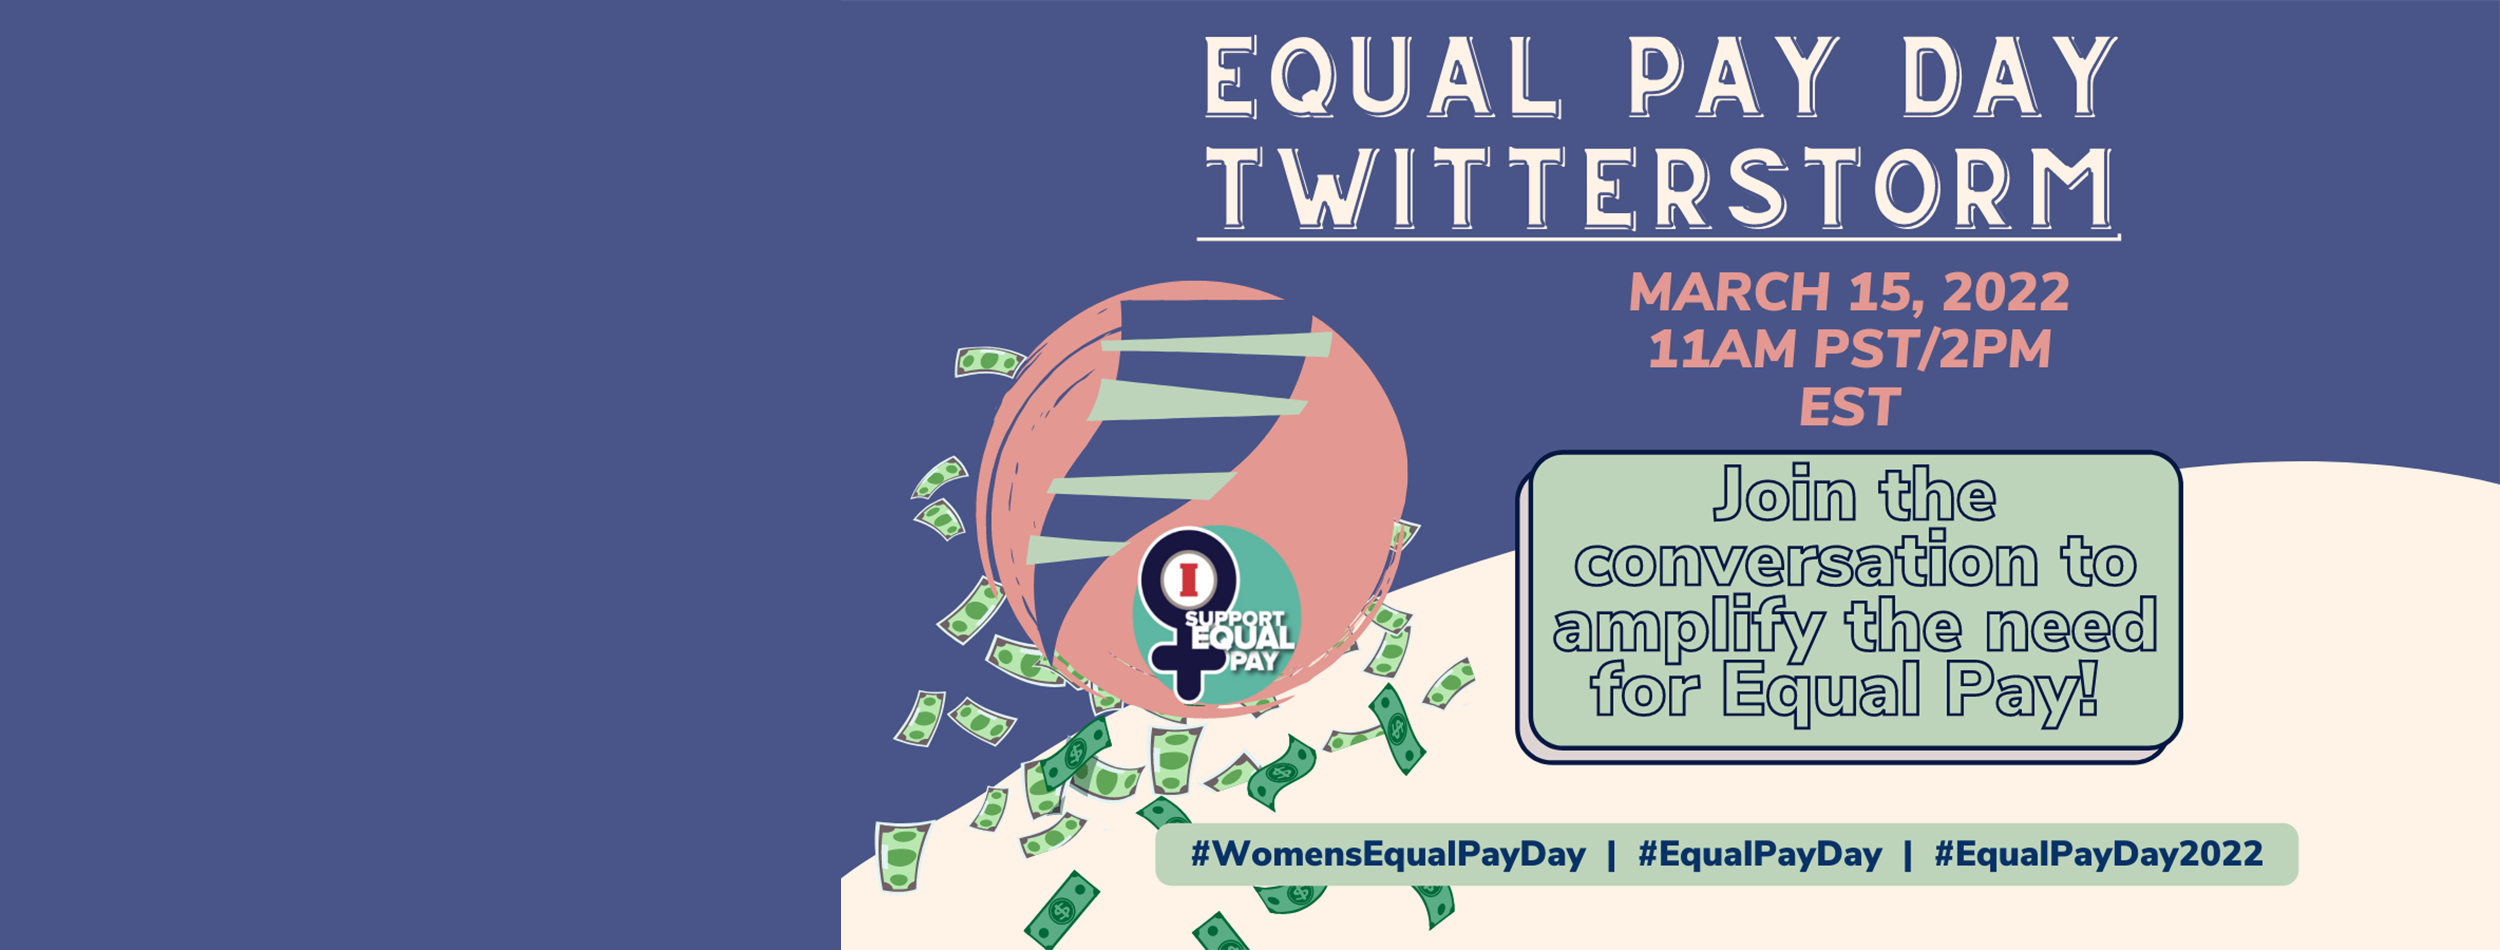 Equal Pay Day Twitterstorm: March 15 11 am Pacific 2 pm Eastern